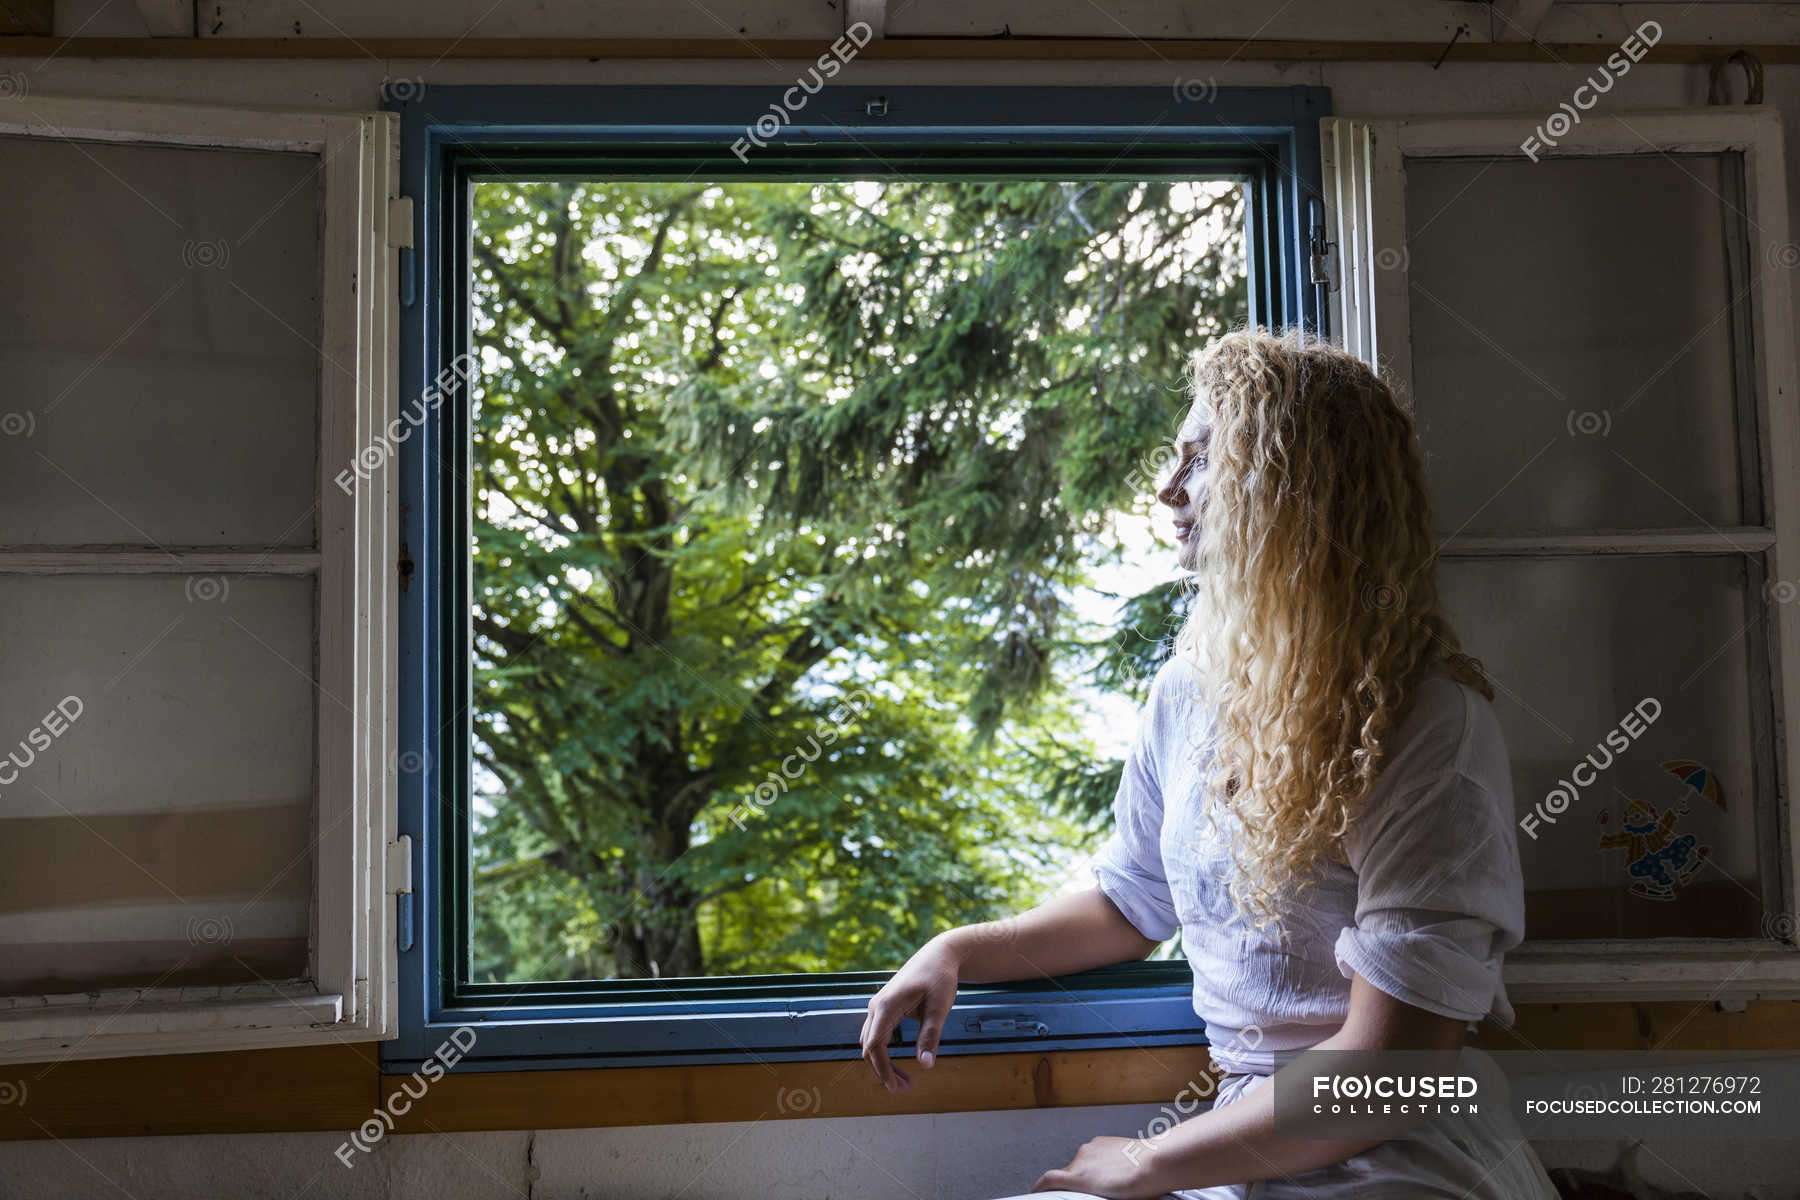 Focused 281276972 Stock Photo Young Woman Looking Out Window 